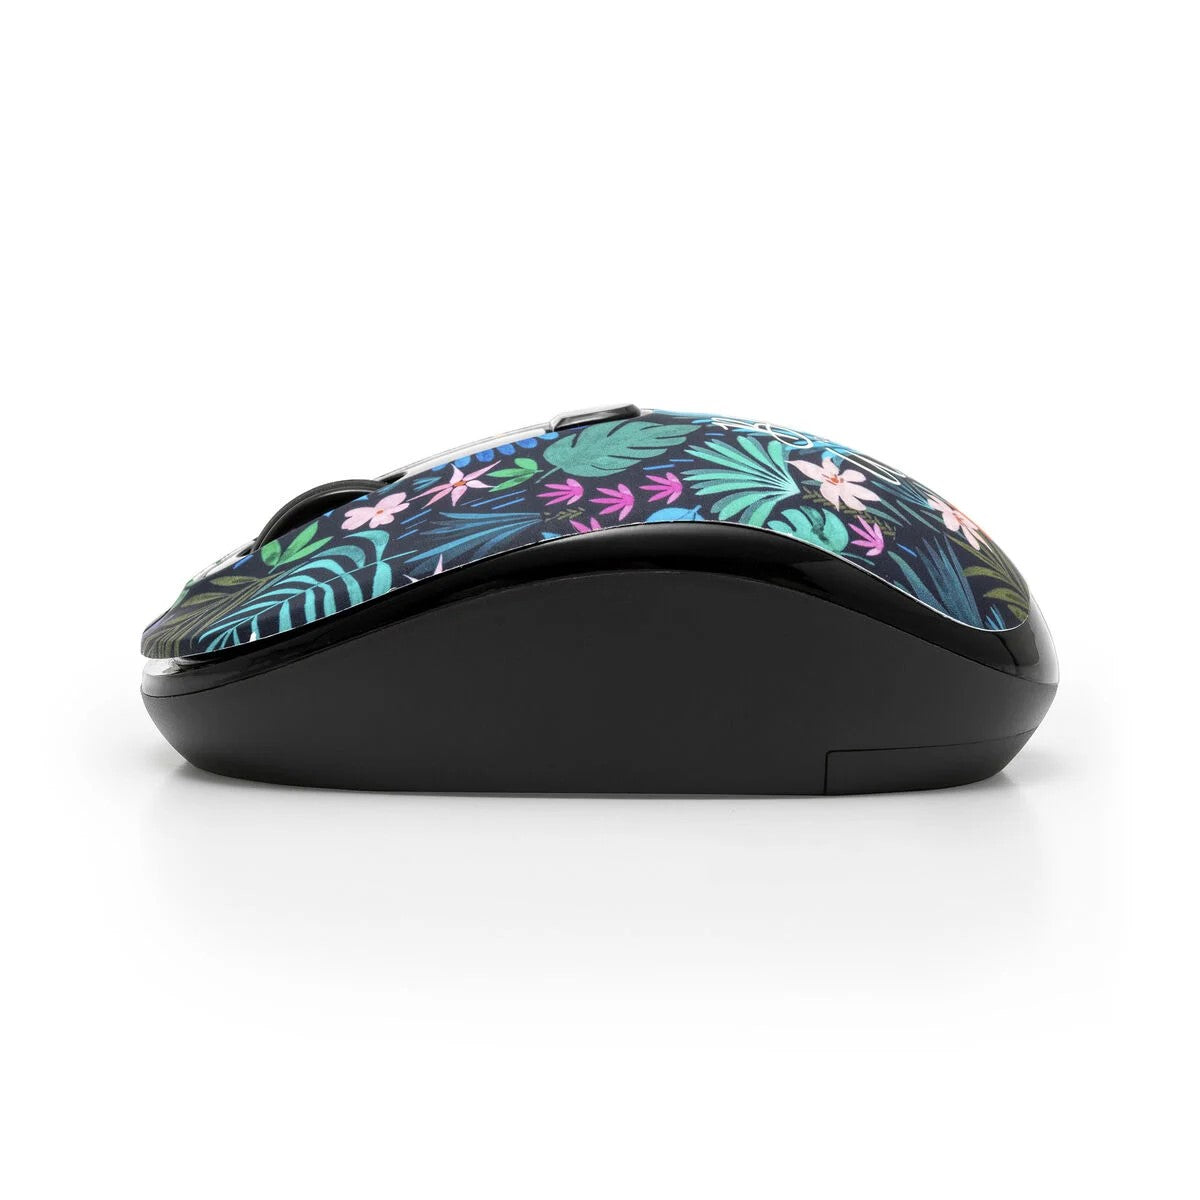 WIRELESS MOUSE - FLORA